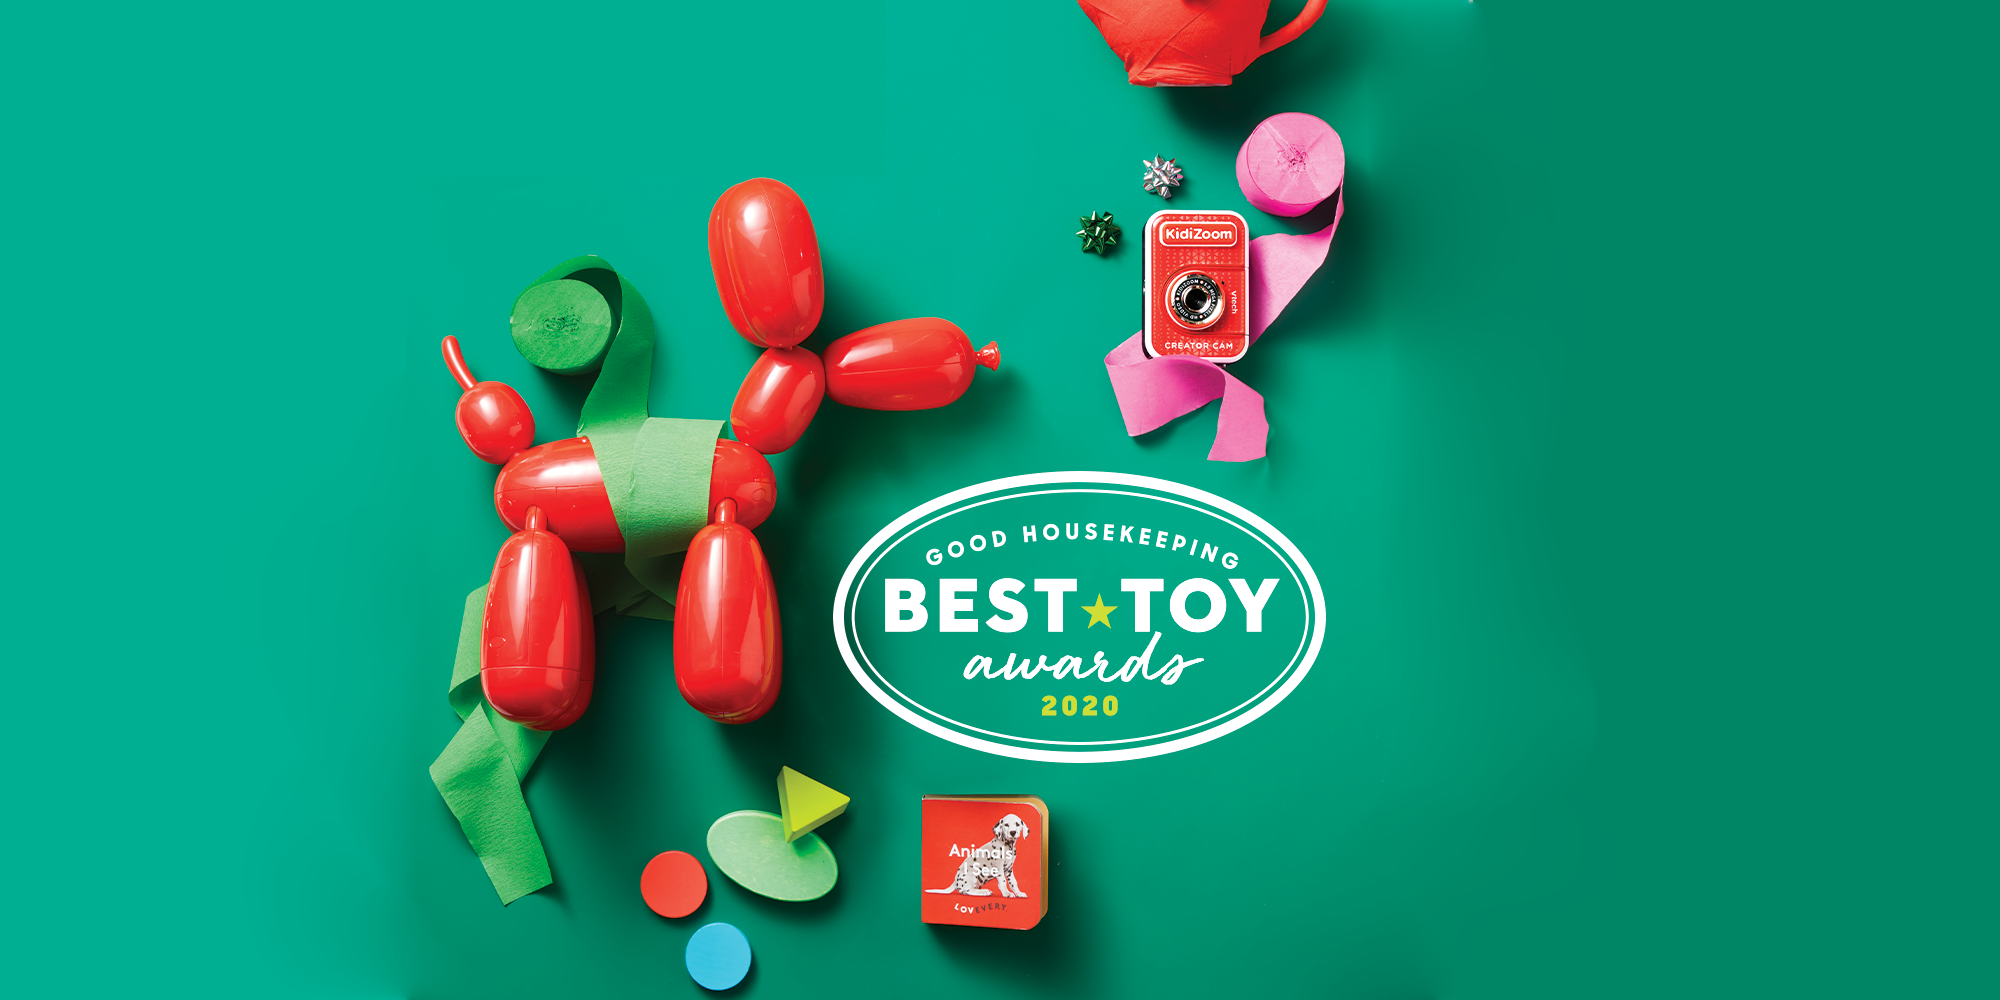 Top Awards for Toys: 2023 Good Housekeeping Best Toy Awards